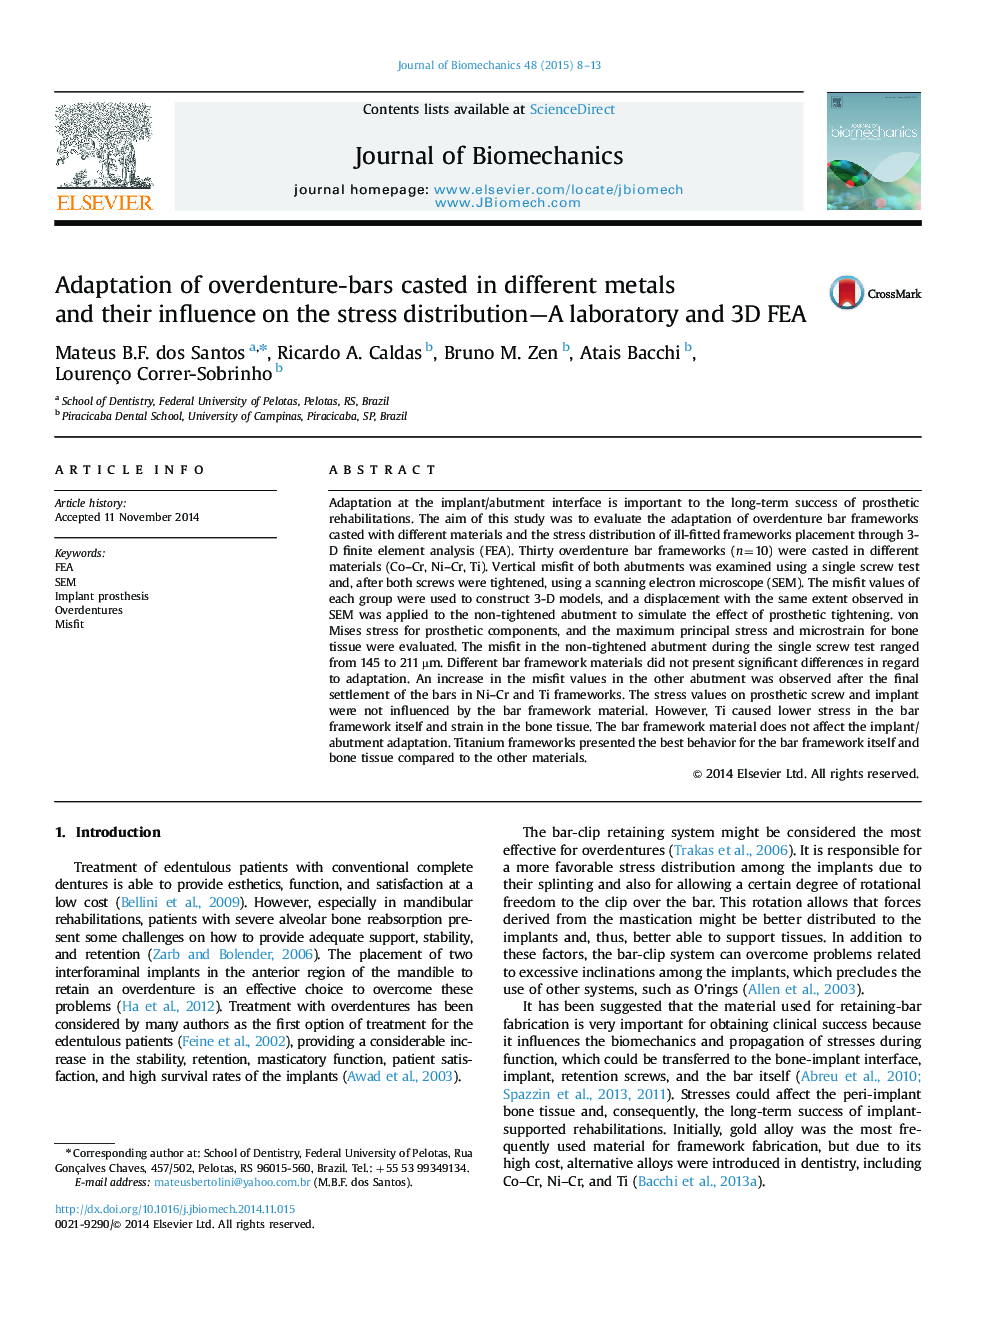 Adaptation of overdenture-bars casted in different metals and their influence on the stress distribution-A laboratory and 3D FEA